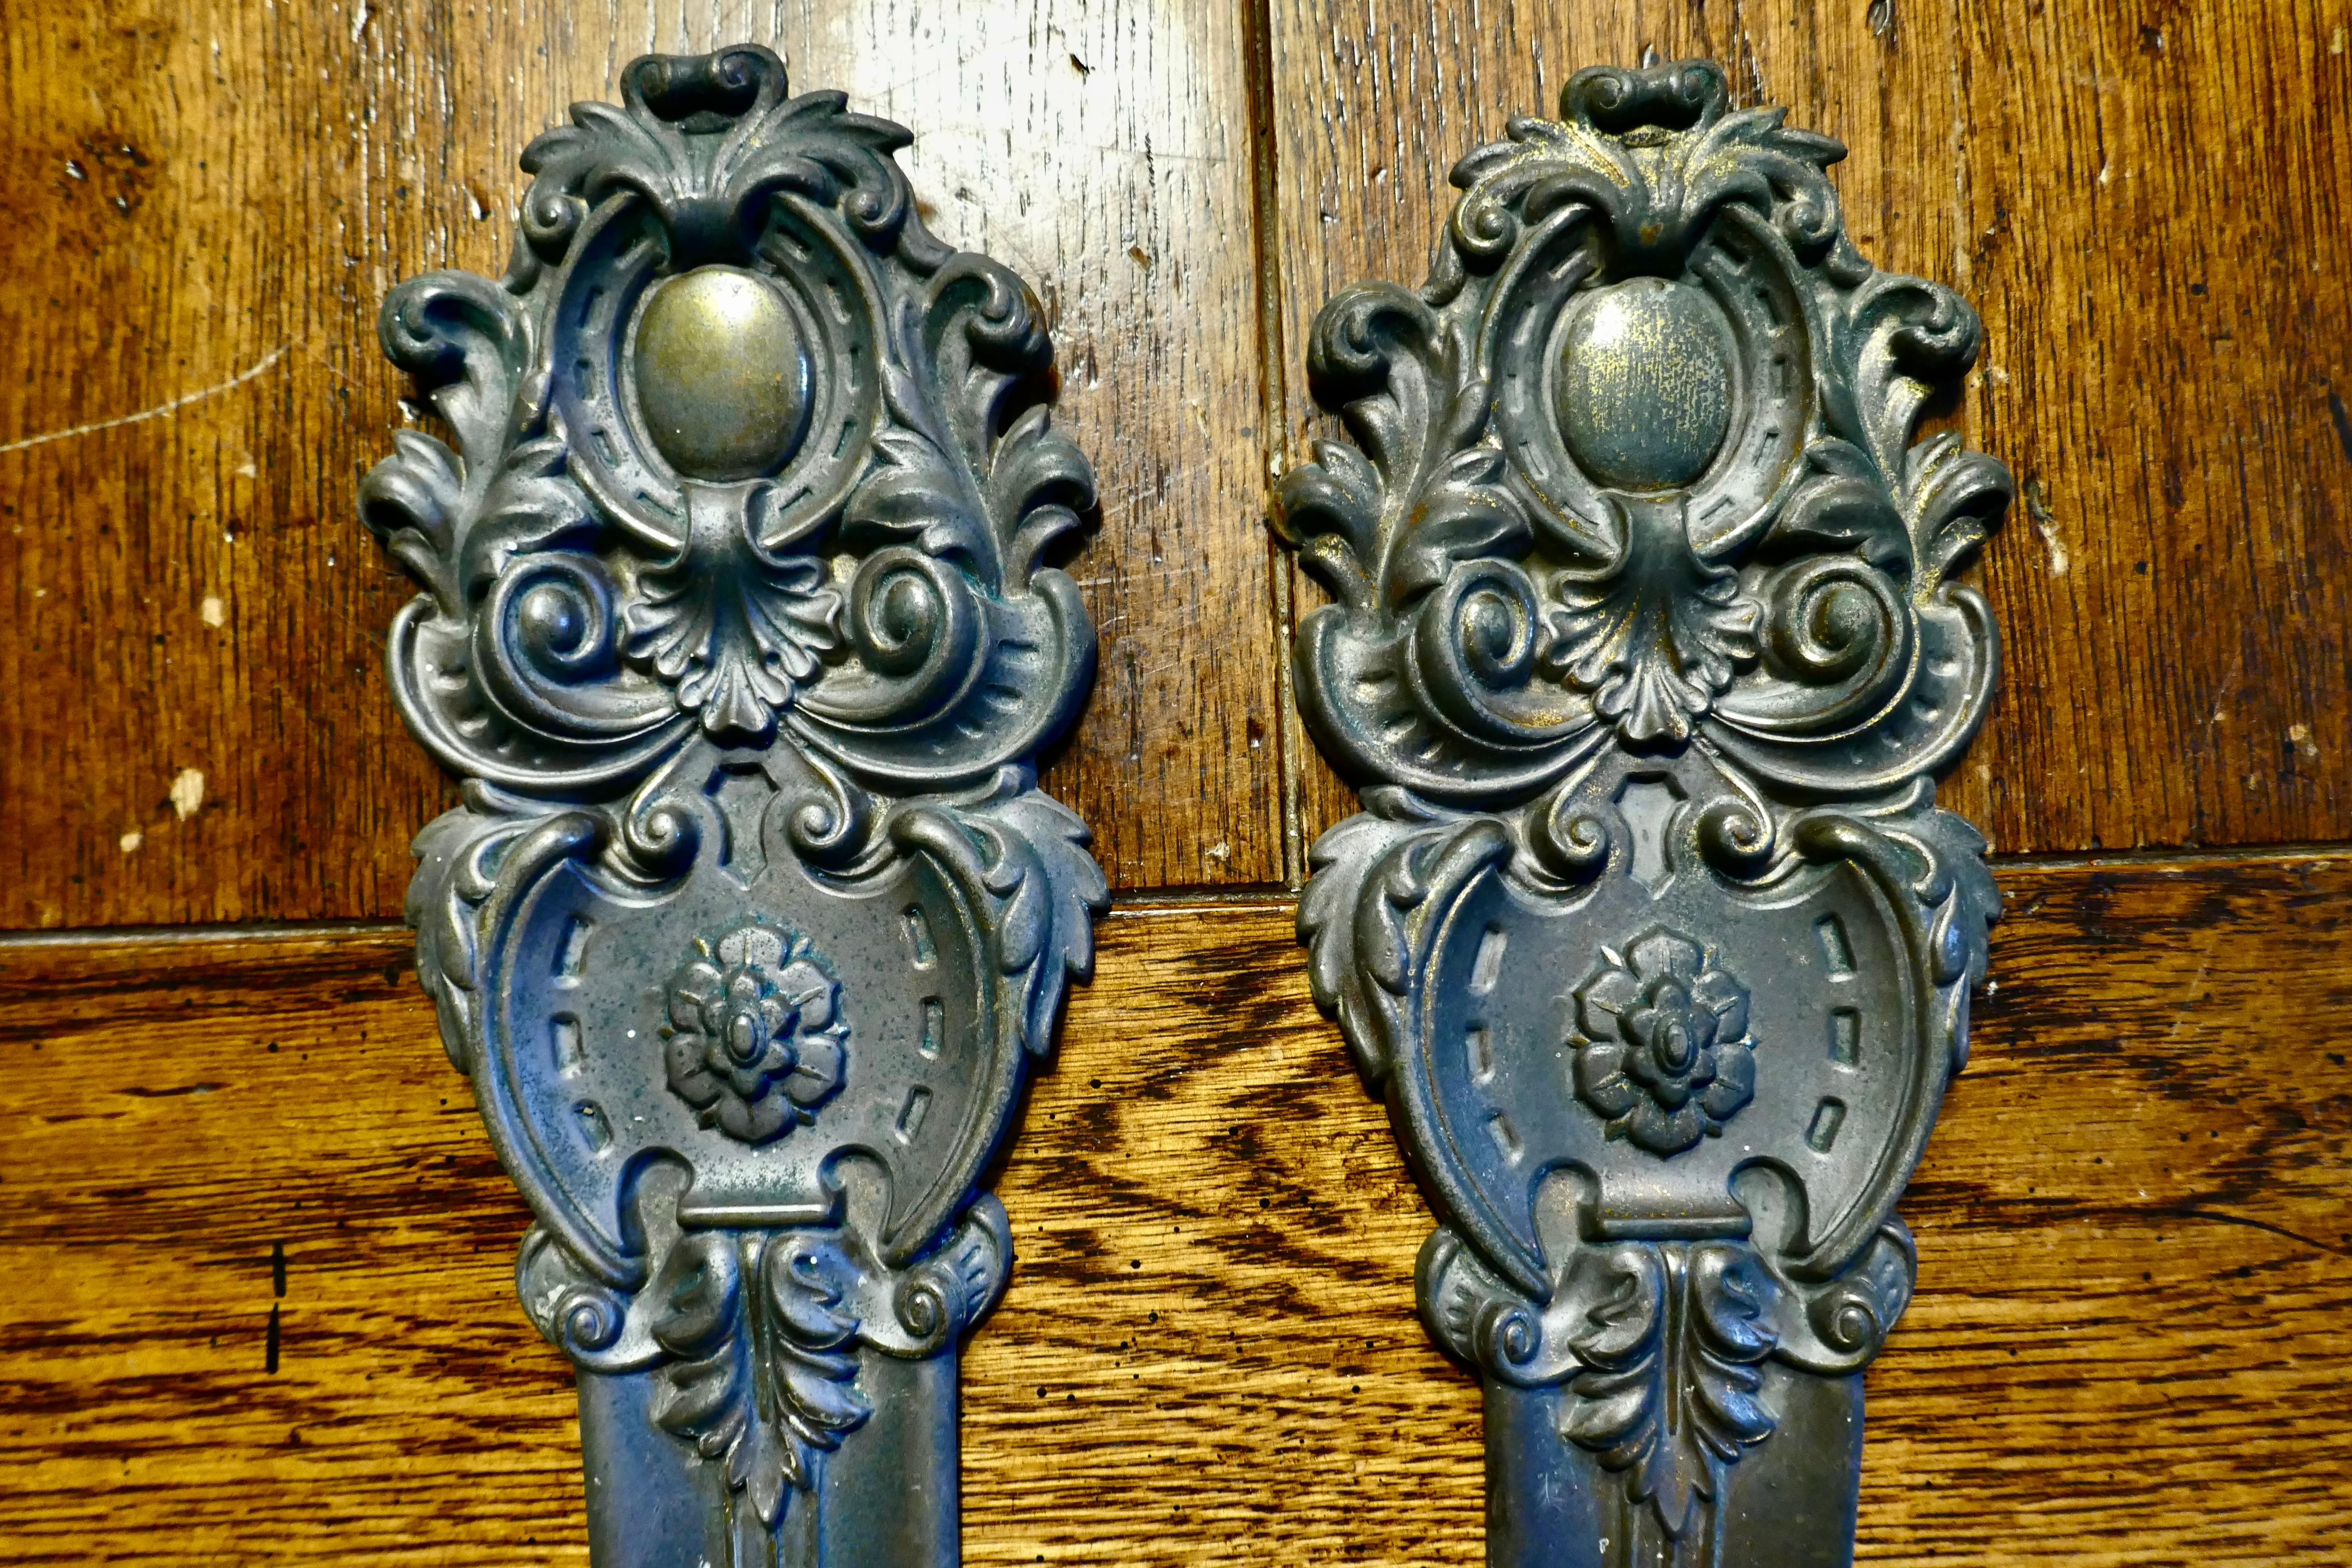 A Pair of Rare Early English 19th century Patinated Brass Curtain Tie Backs 


The Tie Backs or Curtain Hooks are very early pieces made in 4” wide brass, they have not been cleaned they have their aged verdigris original patina 
The brackets